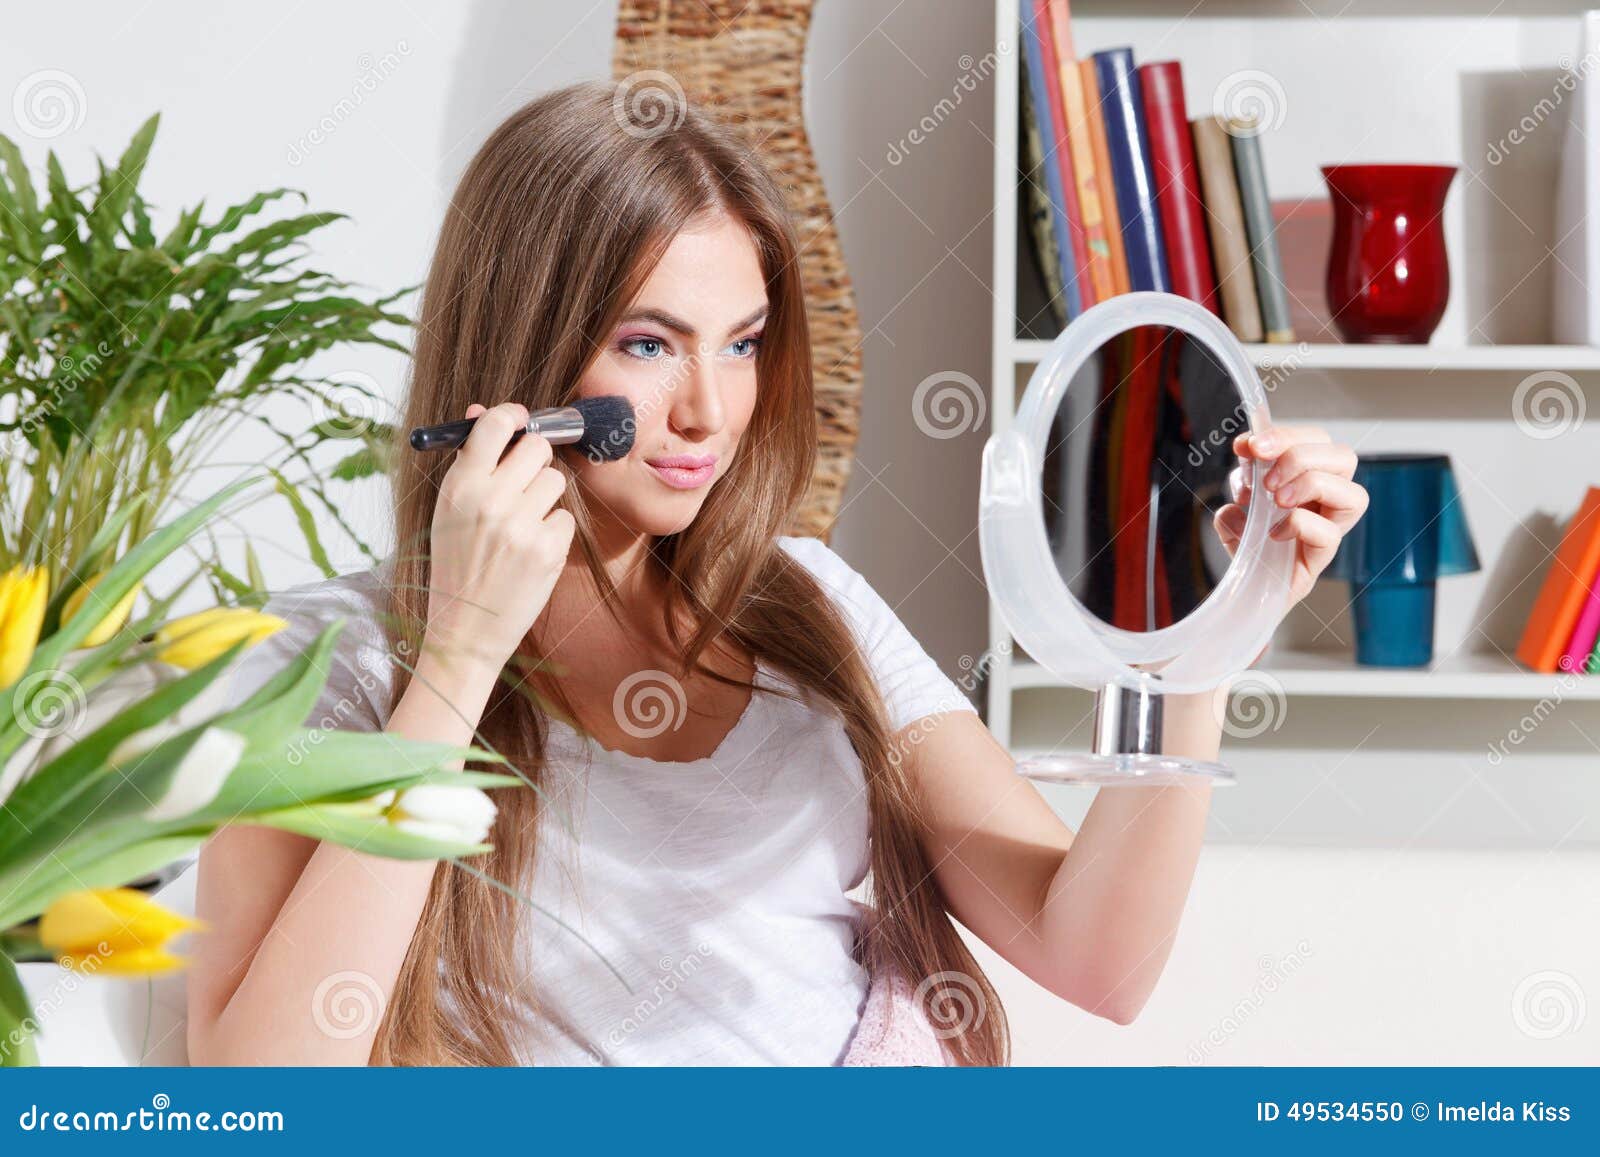 pretty woman putting makeup on